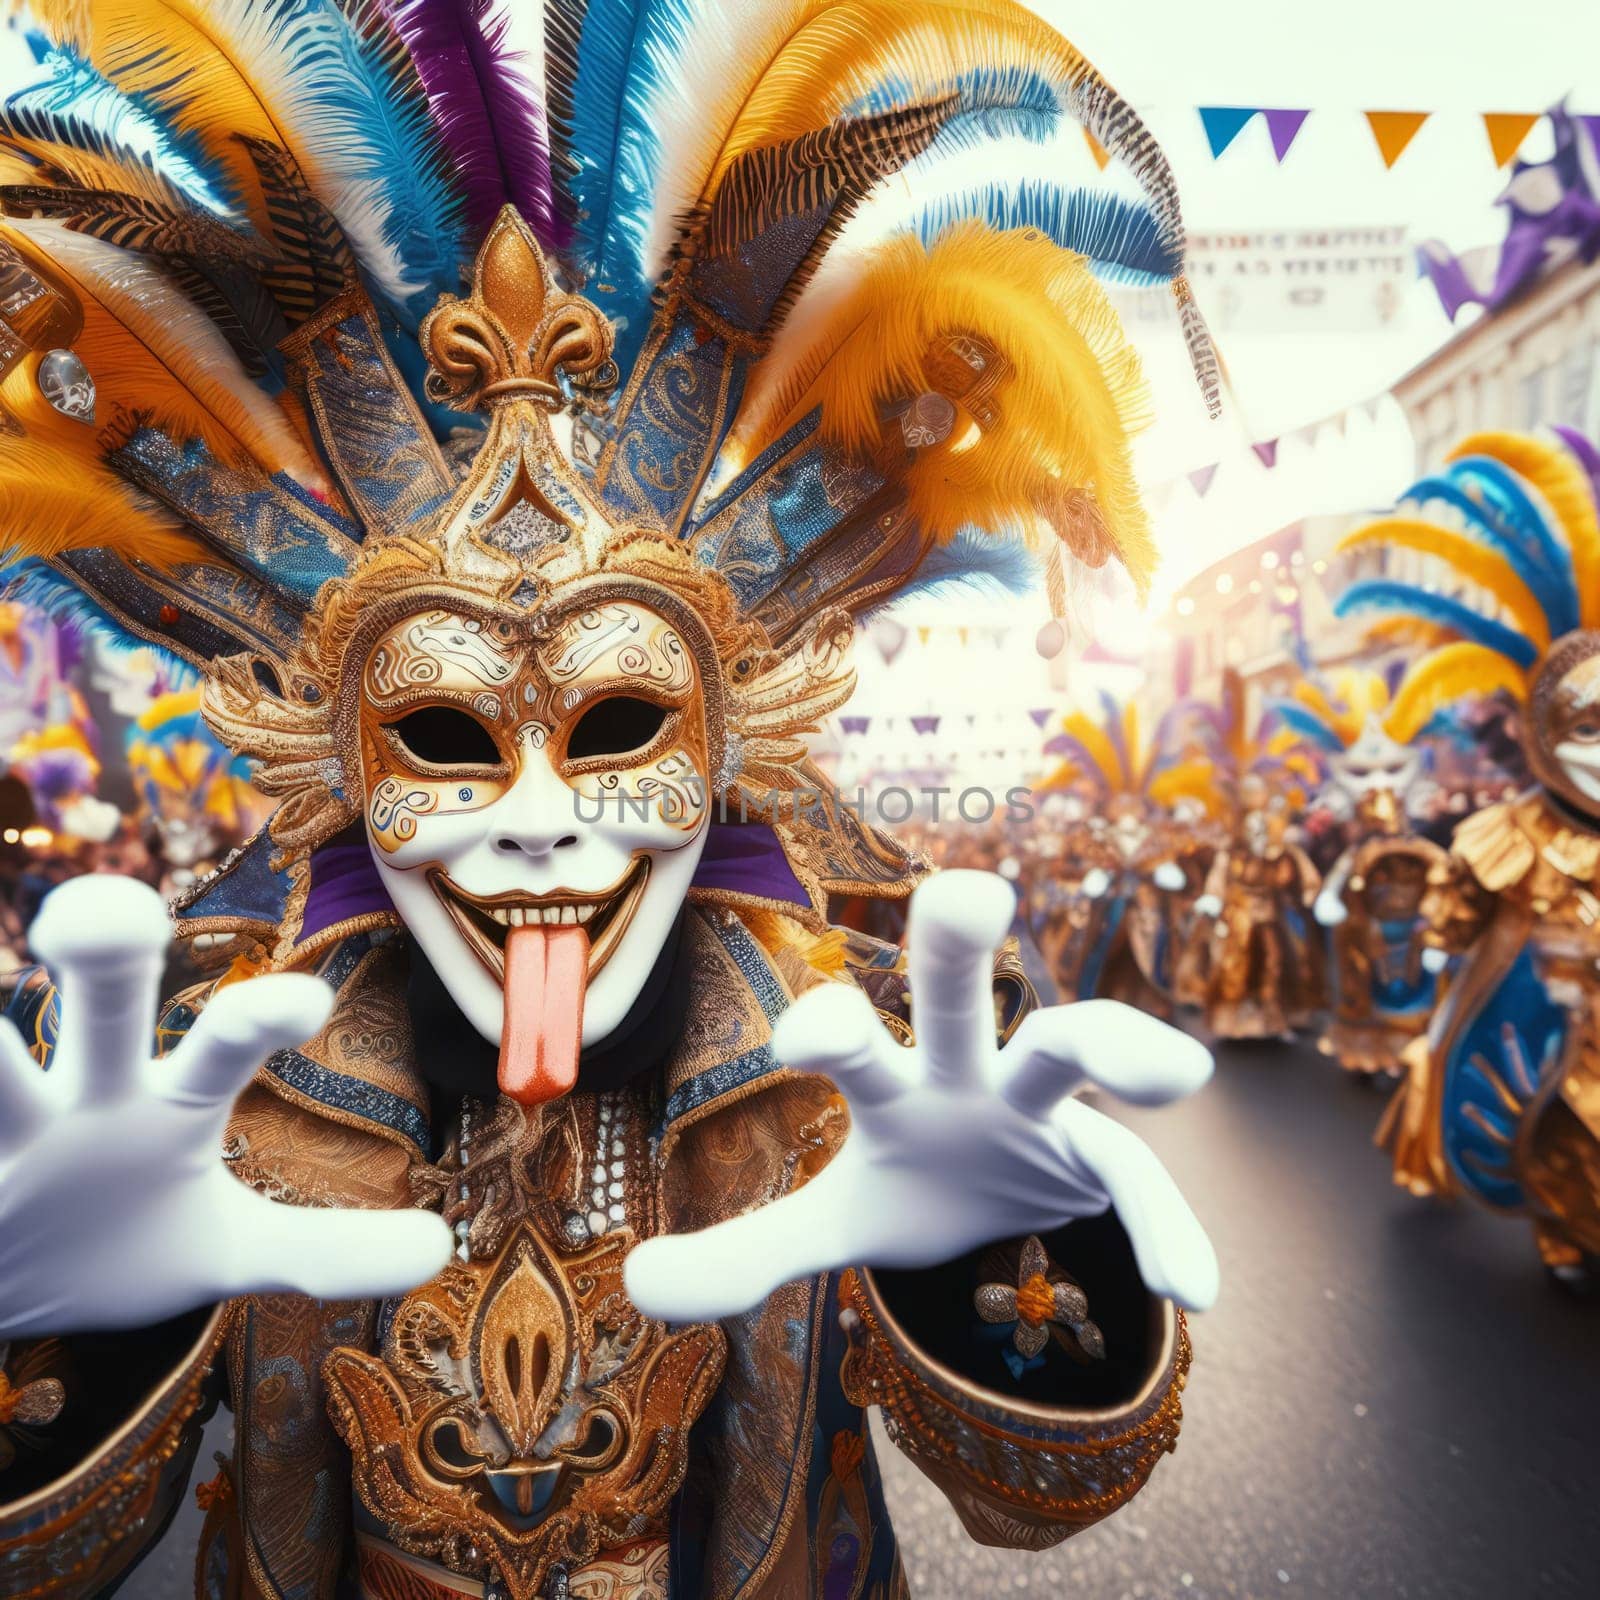 Vibrant carnival scene with a masked participant in ornate attire reaching out amidst a lively street festival